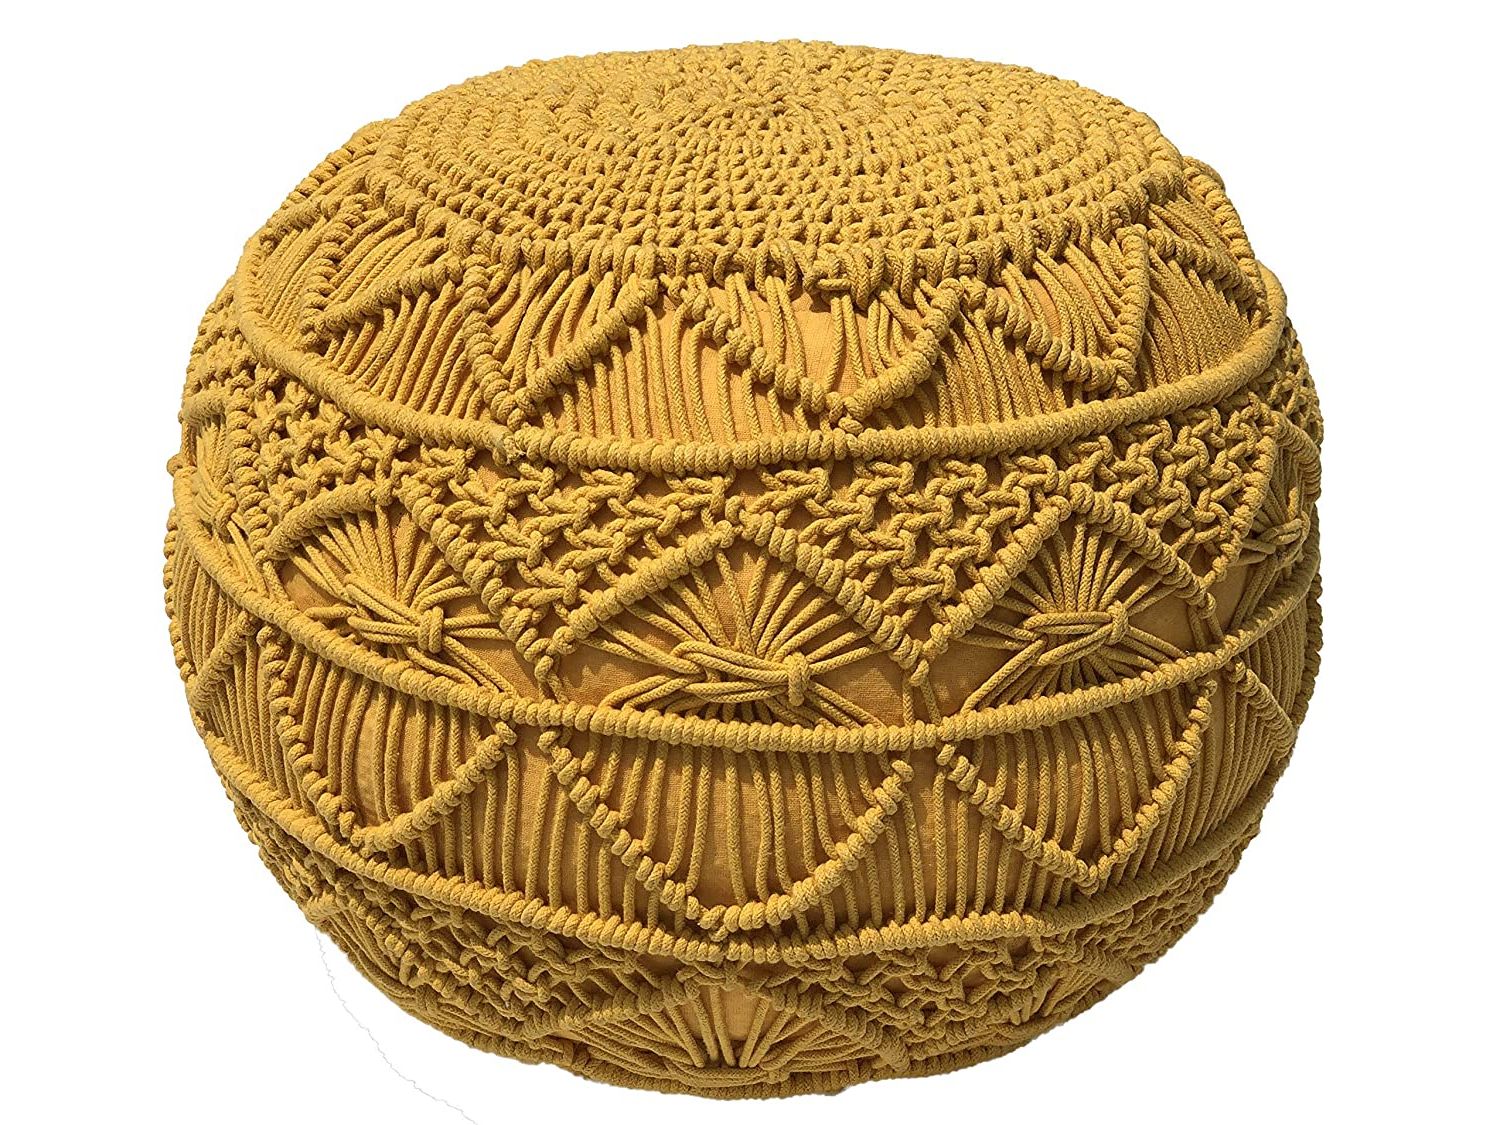 Hand Knitted Decorative Round Cotton Pouf Natural Braid Cord Textured For 2020 Textured Green Round Pouf Ottomans (View 10 of 10)